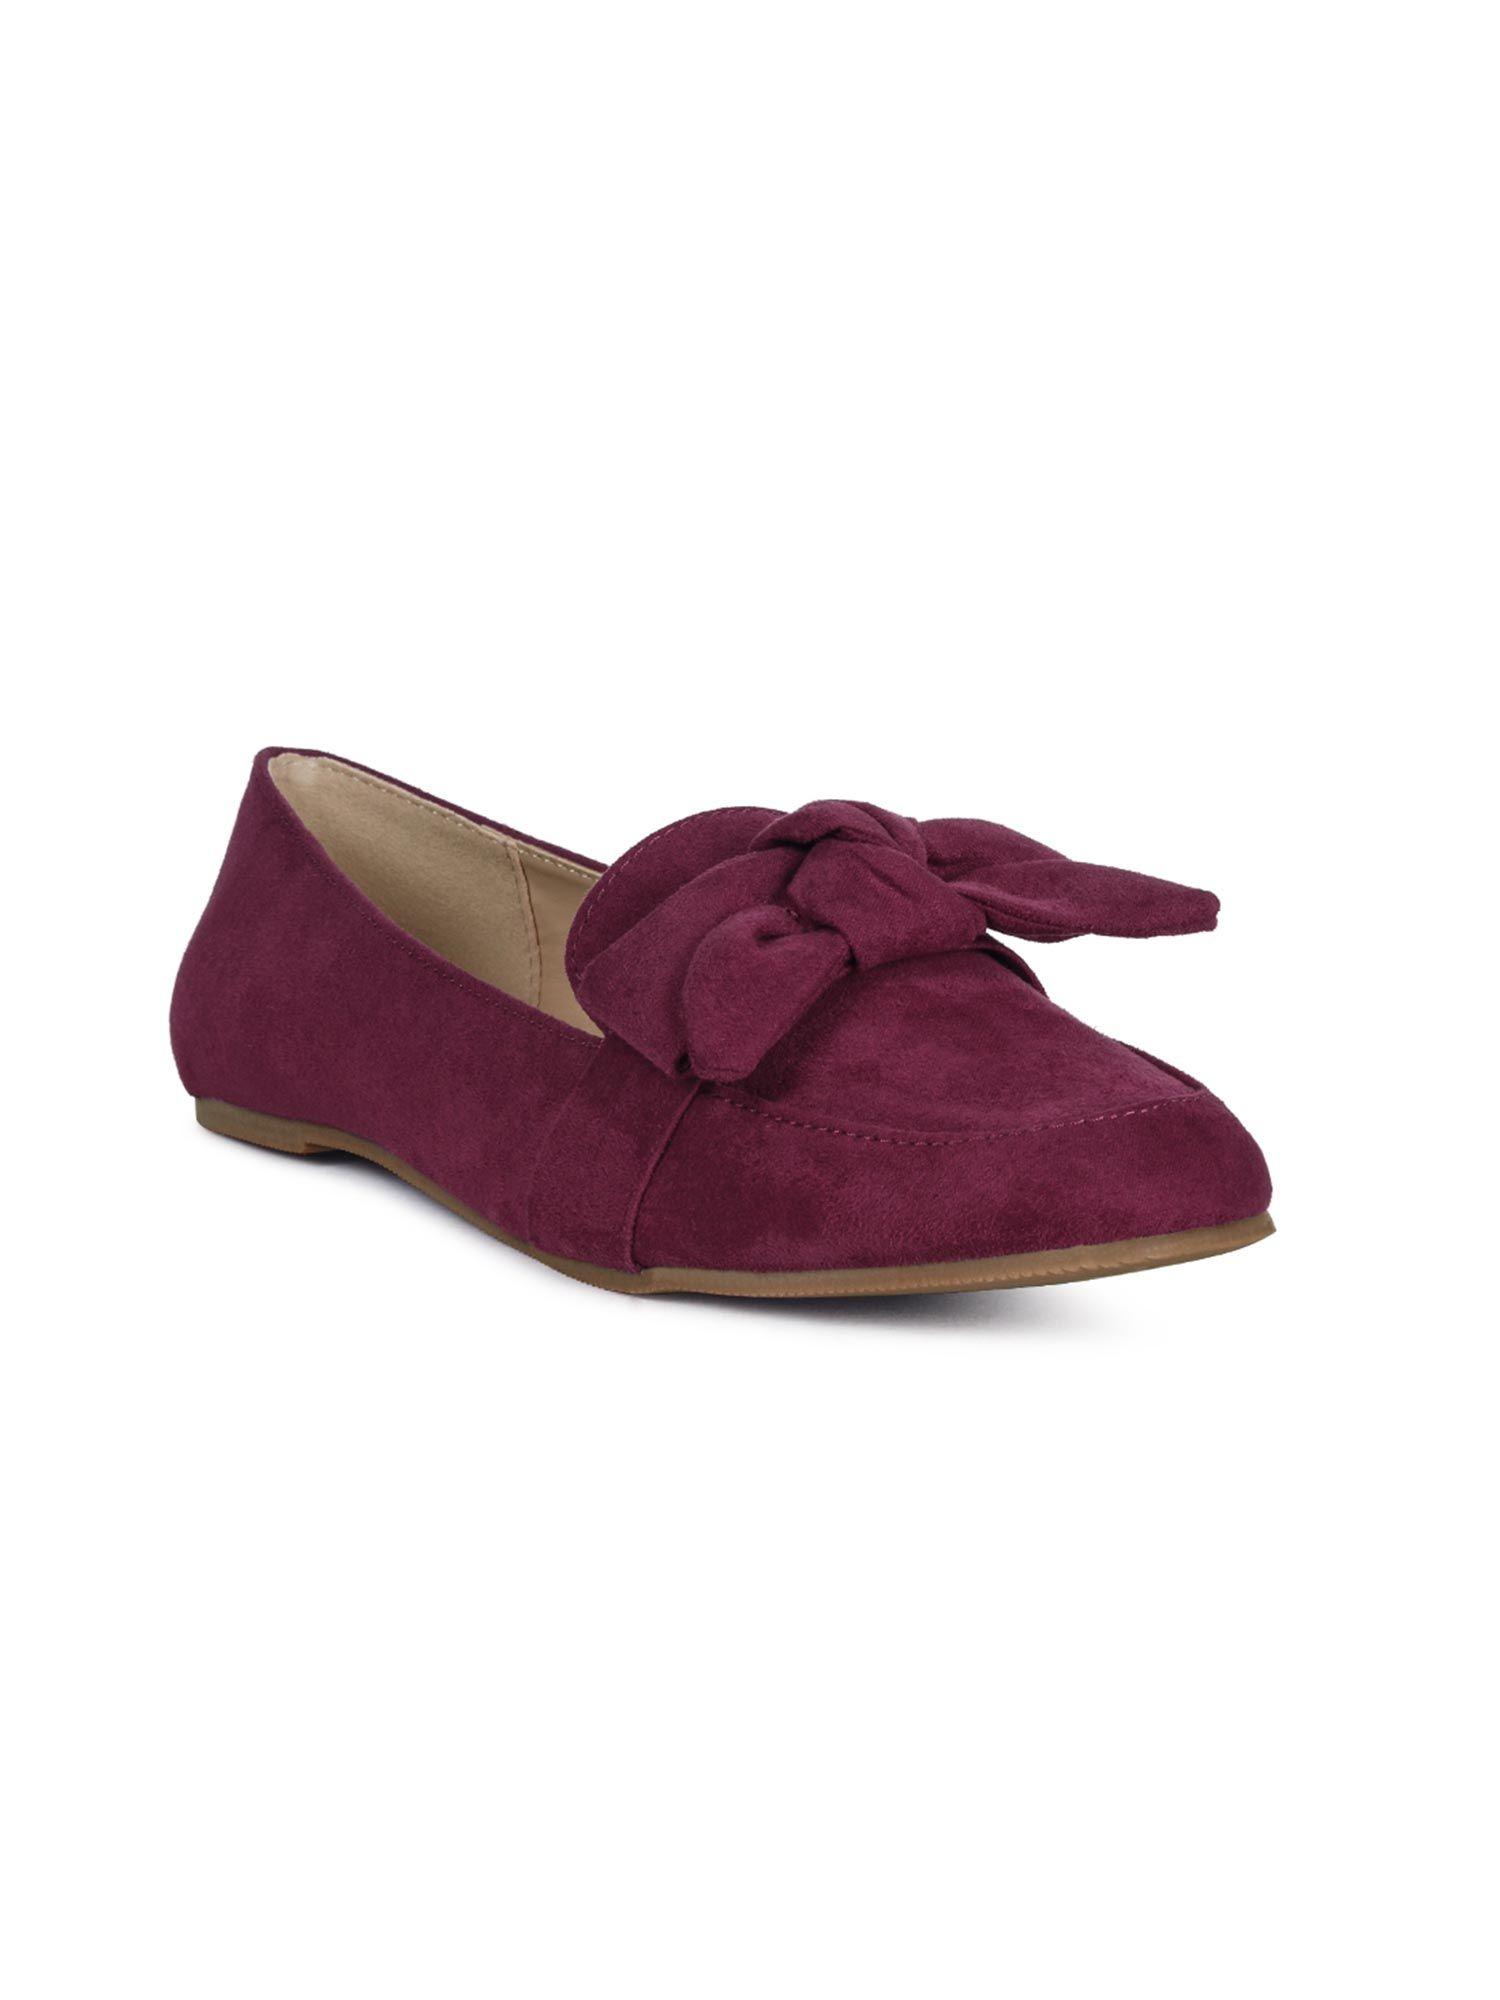 pointed toe loafers in burgundy